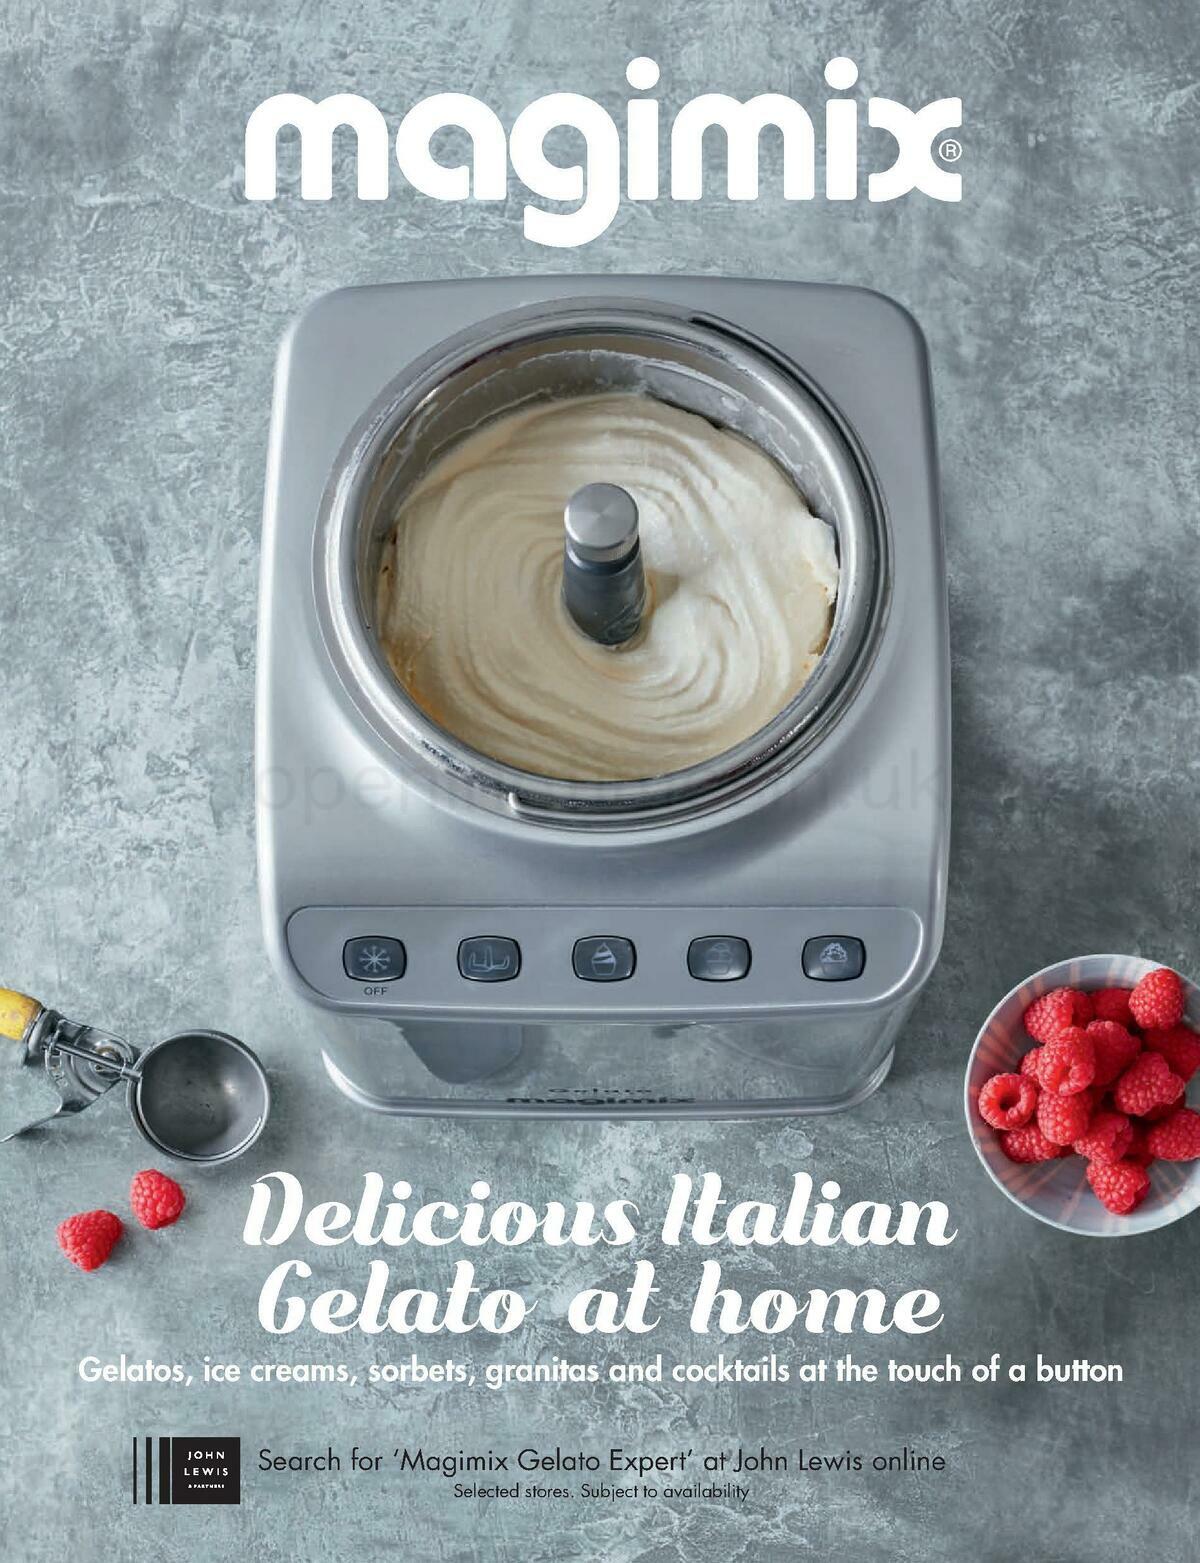 Waitrose Food Magazine July Offers from 1 July